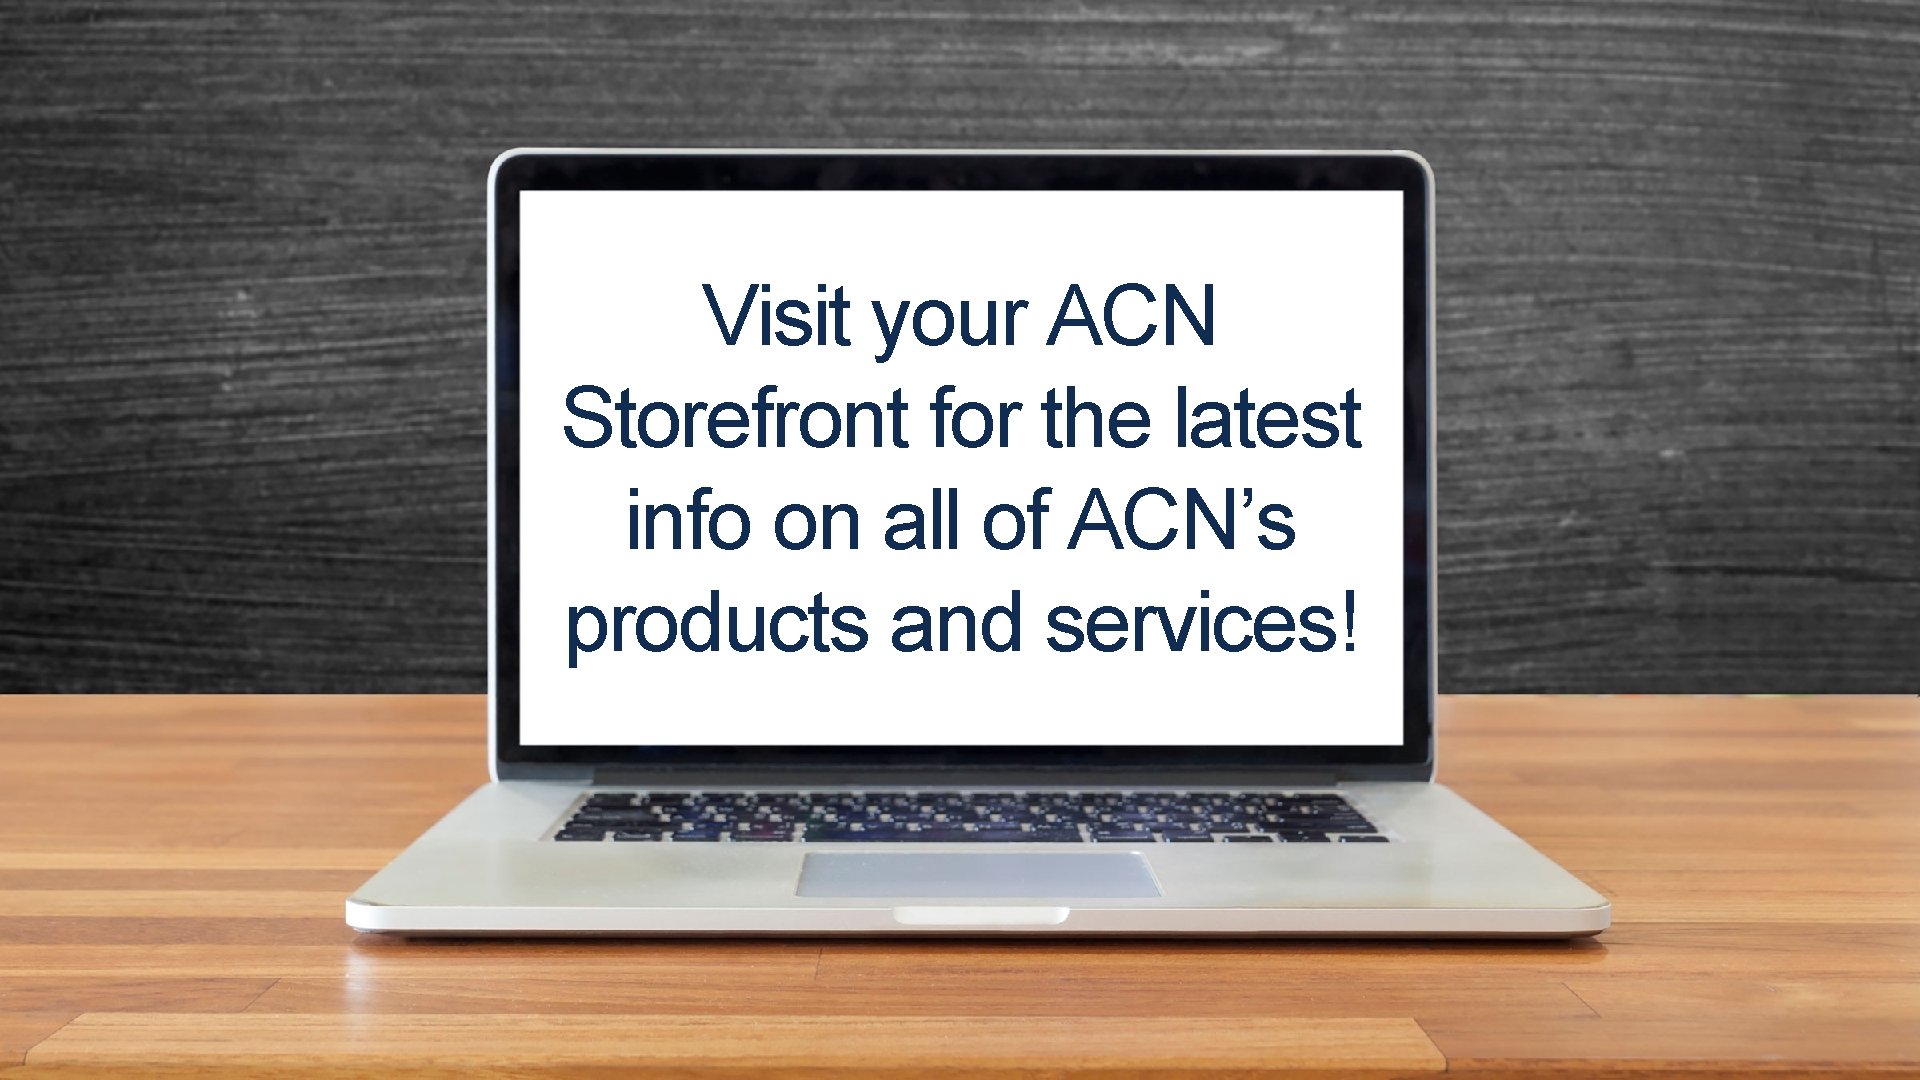 Visit your ACN Storefront for the latest info on all of ACN’s products and